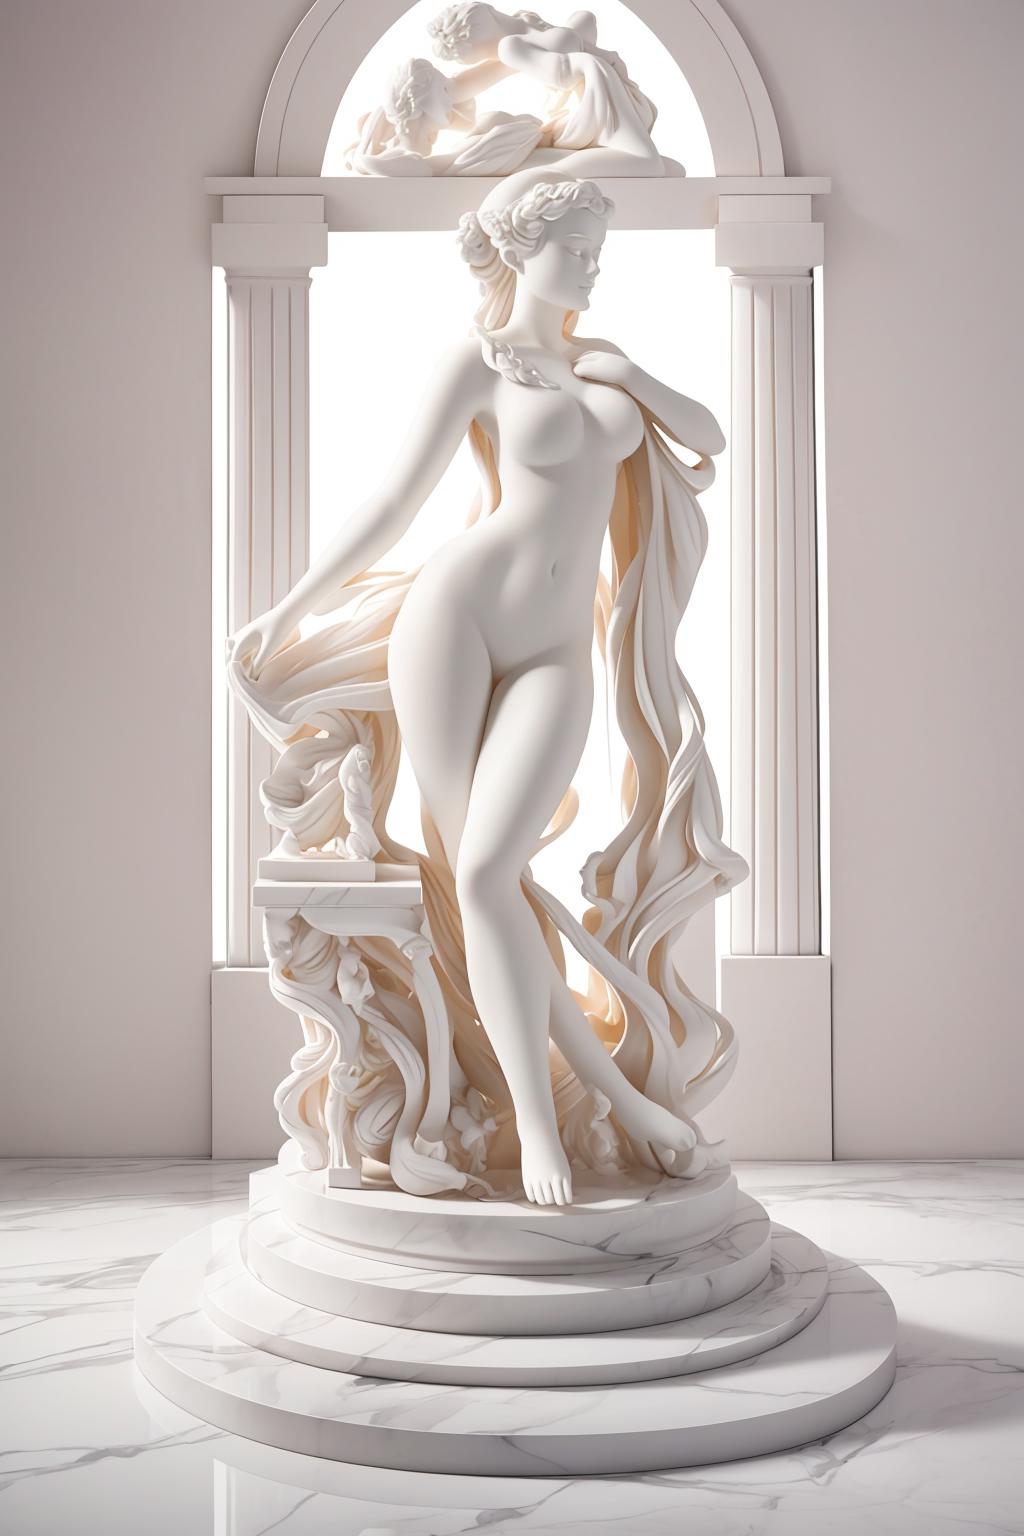 A white statue of a naked woman posing in a room with a marble floor.